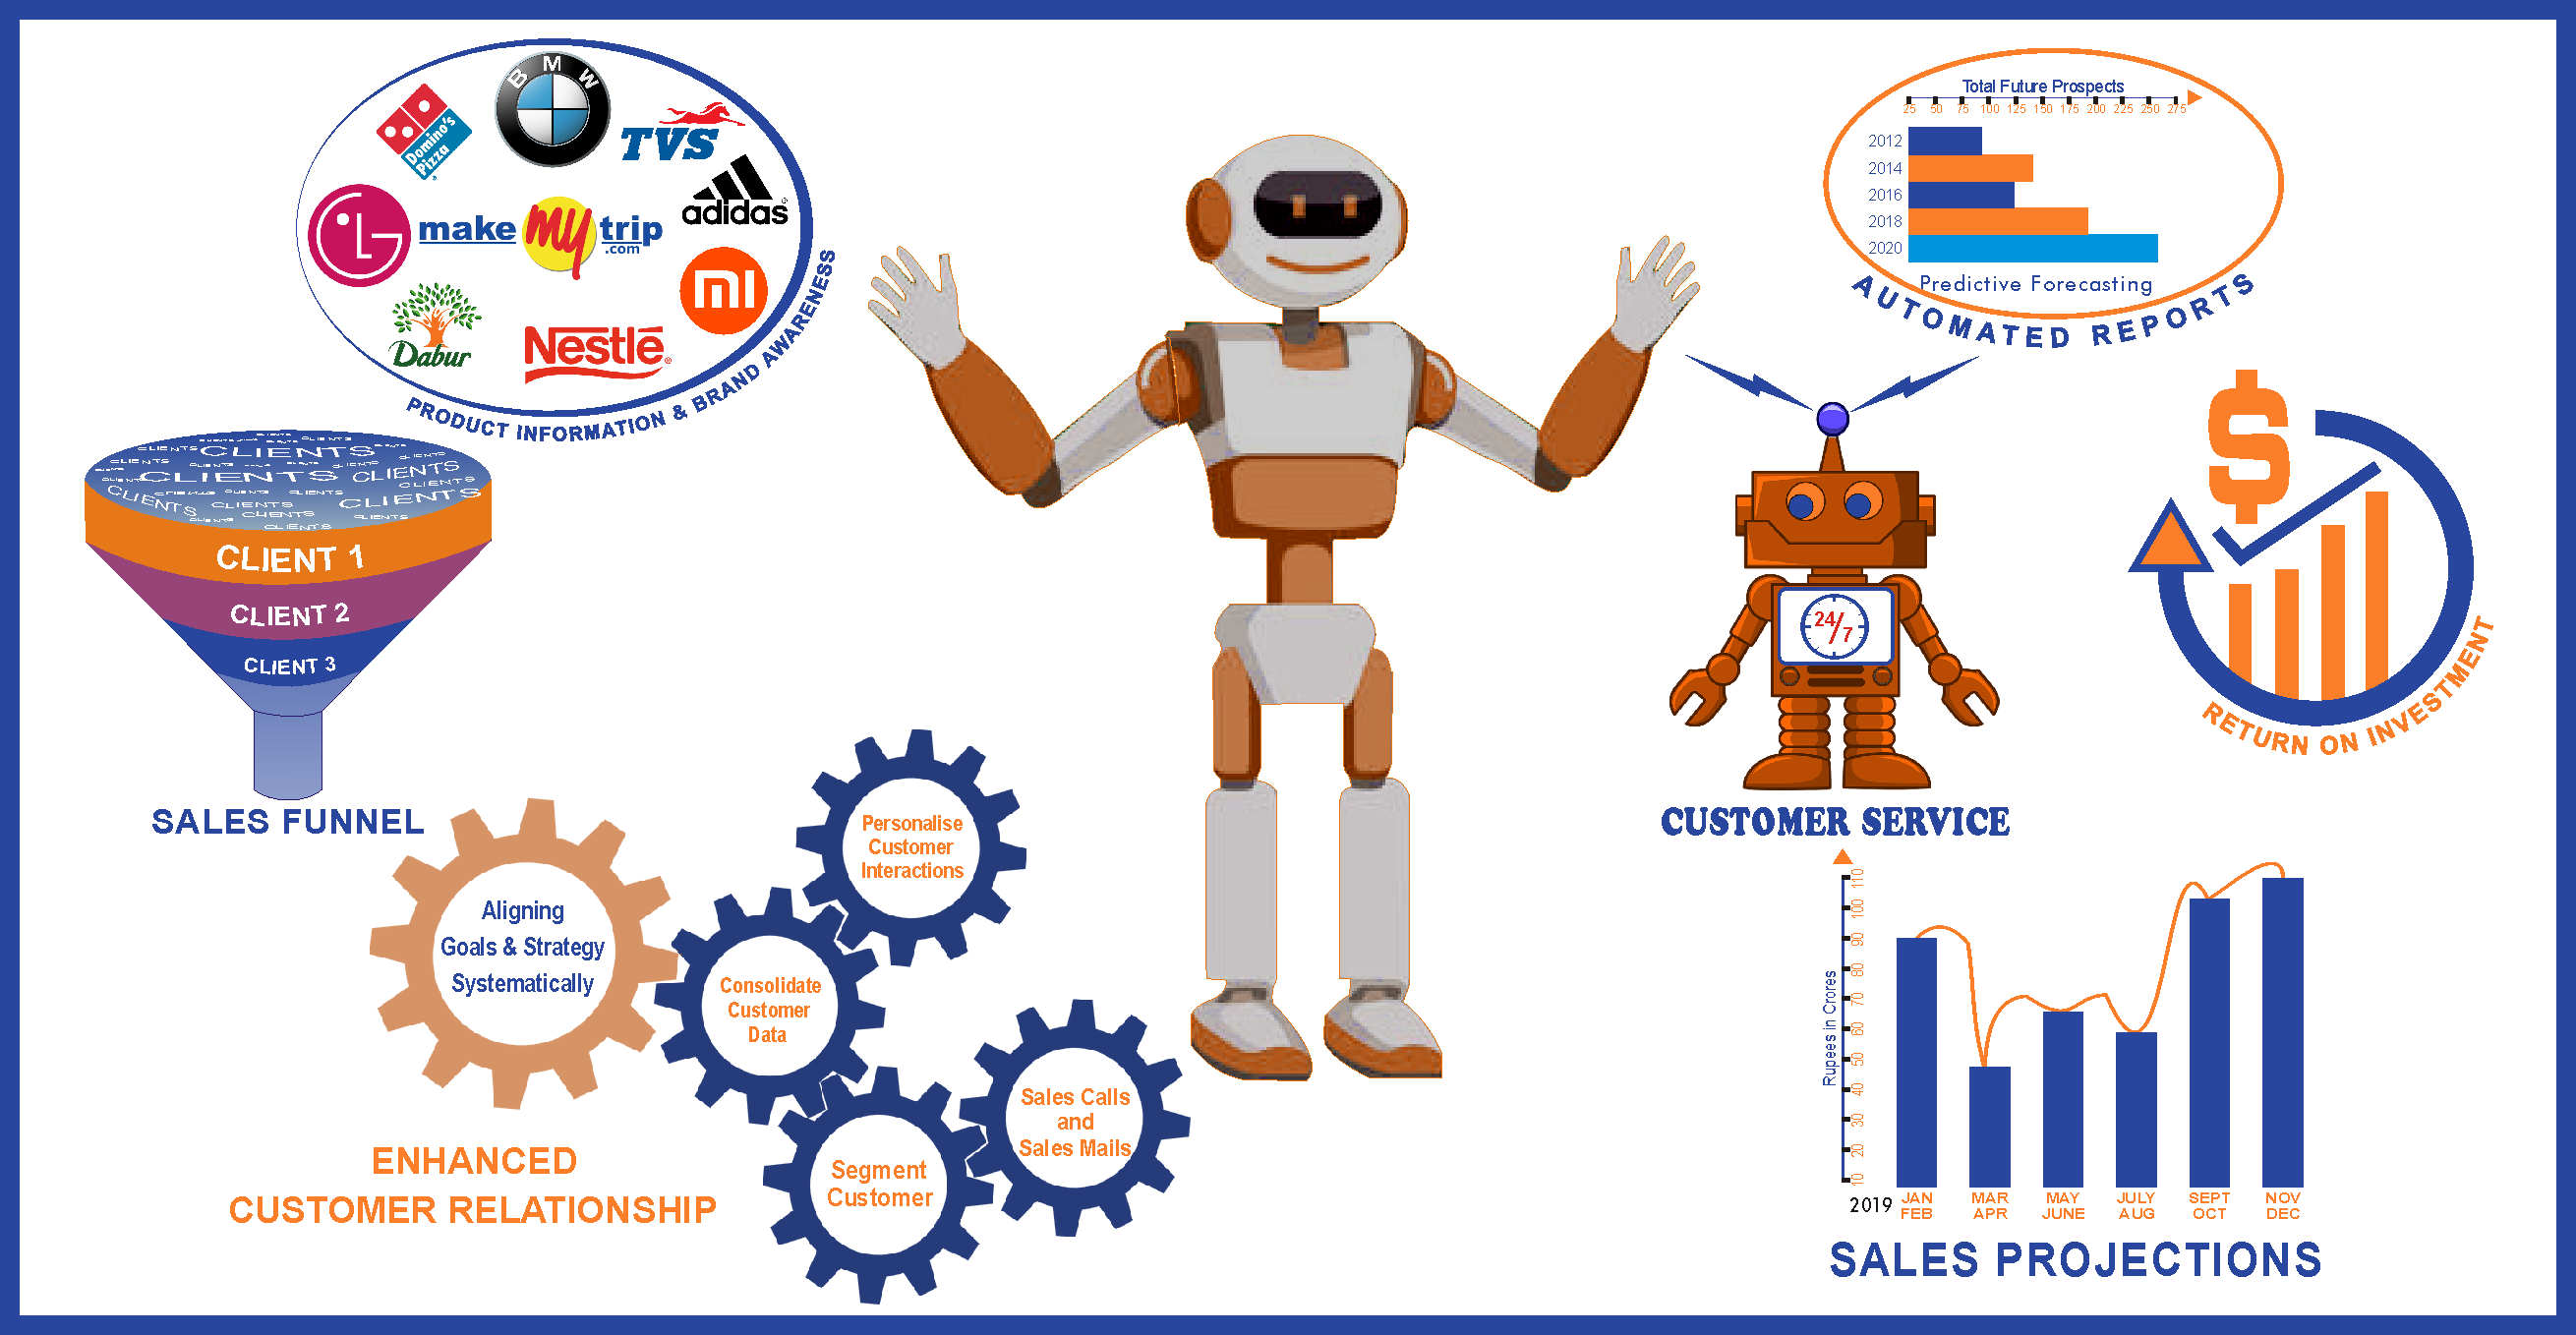 Sales-operations-could-be-automated-using-AI